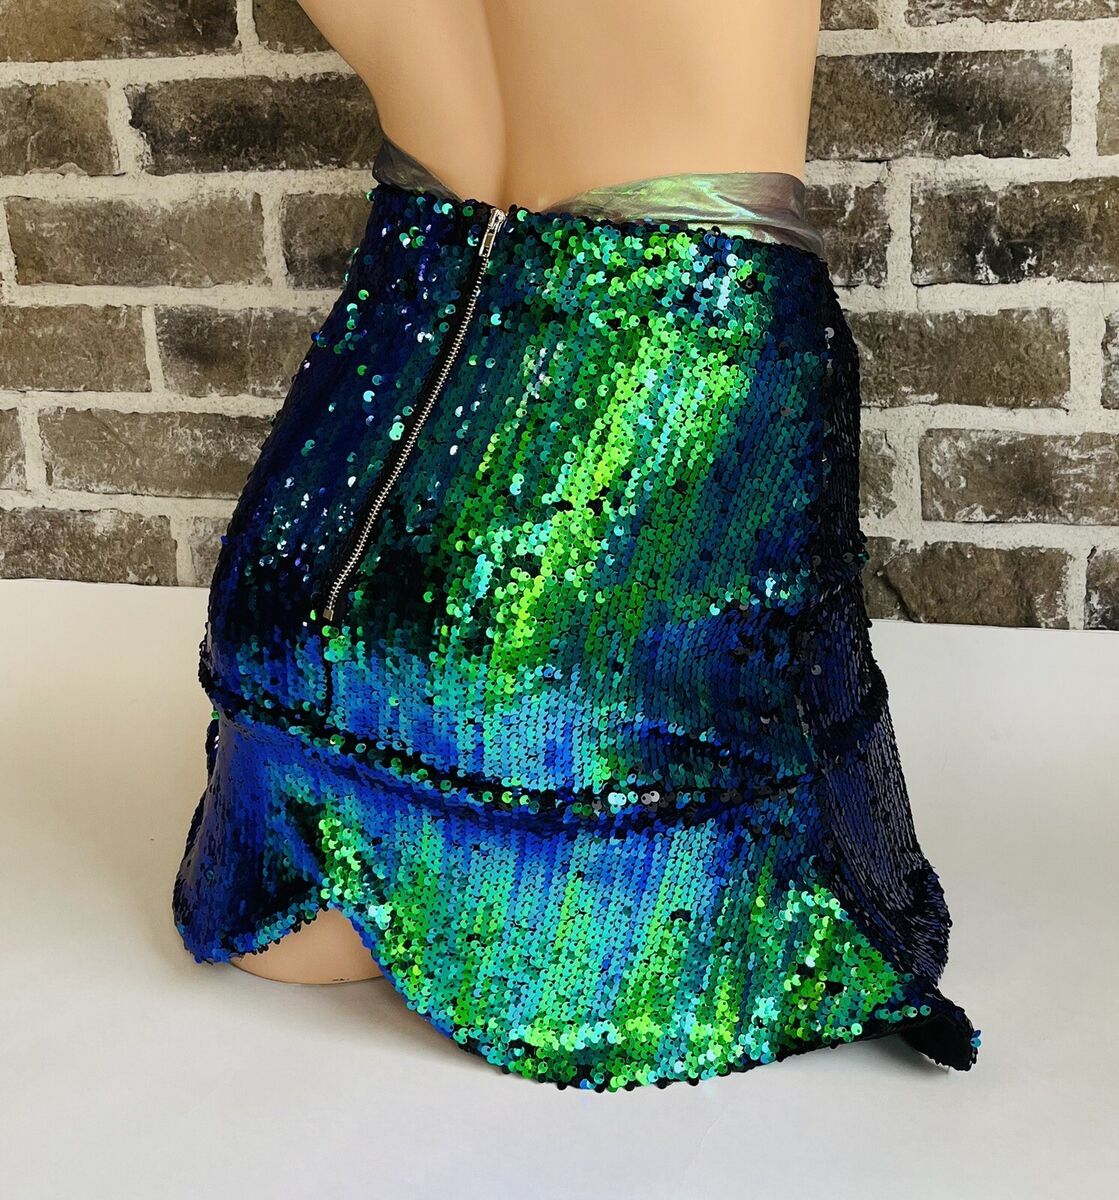 annie paschall recommends mermaid short skirt costume pic